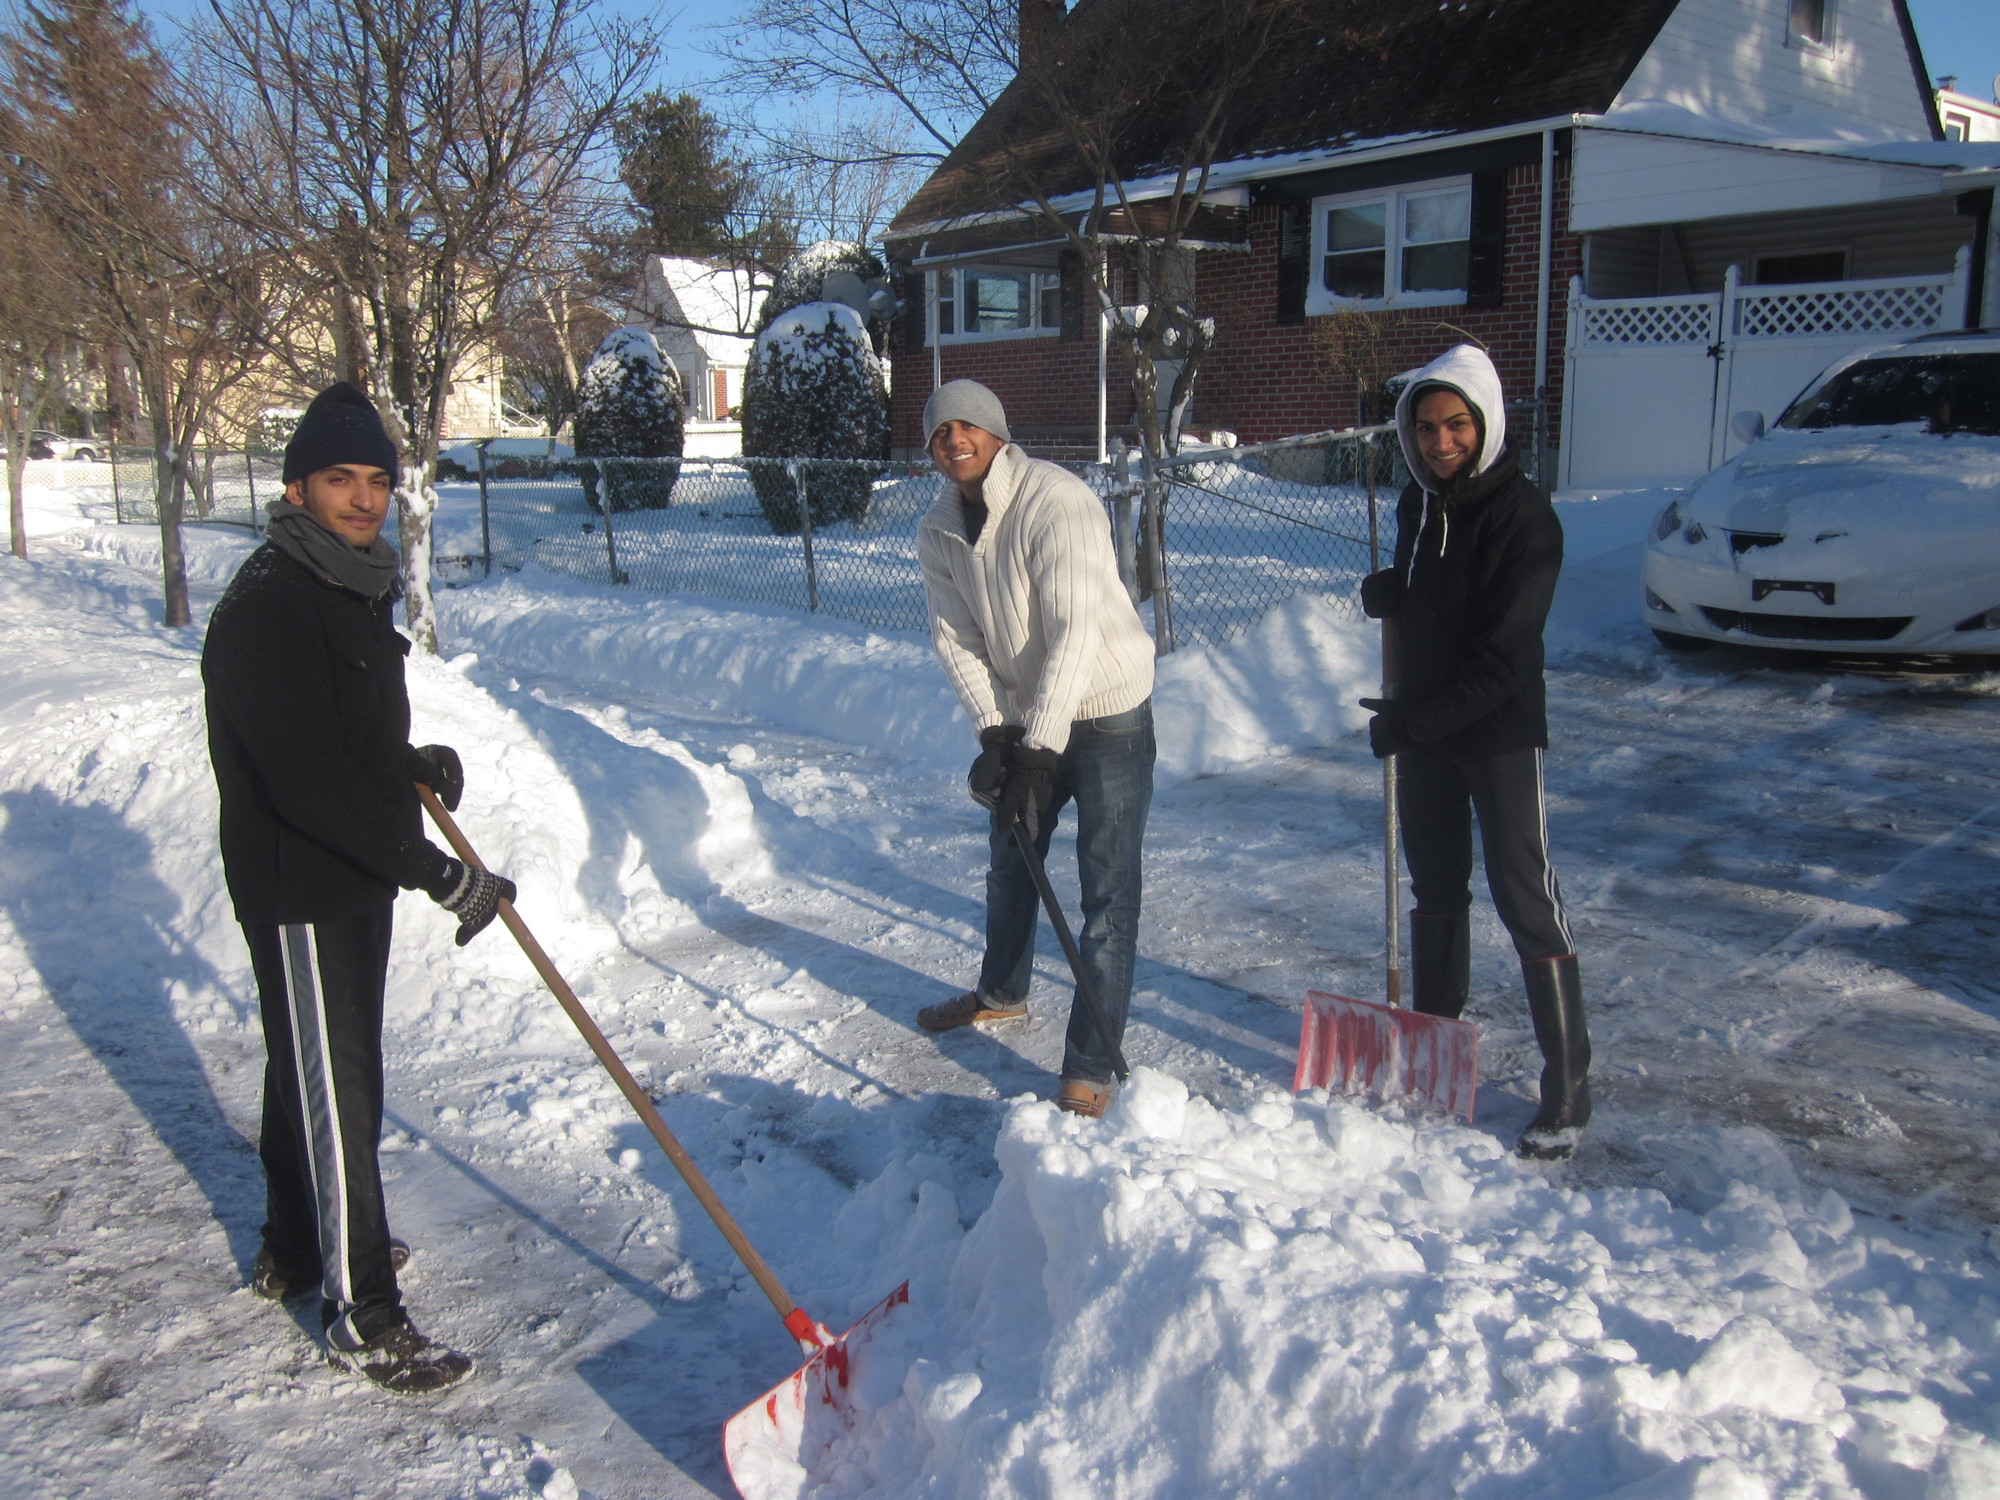 The Patels, from left, Ajay, Dave and Nilam made shoveling a family activity in front of their Lincoln Avenue home.